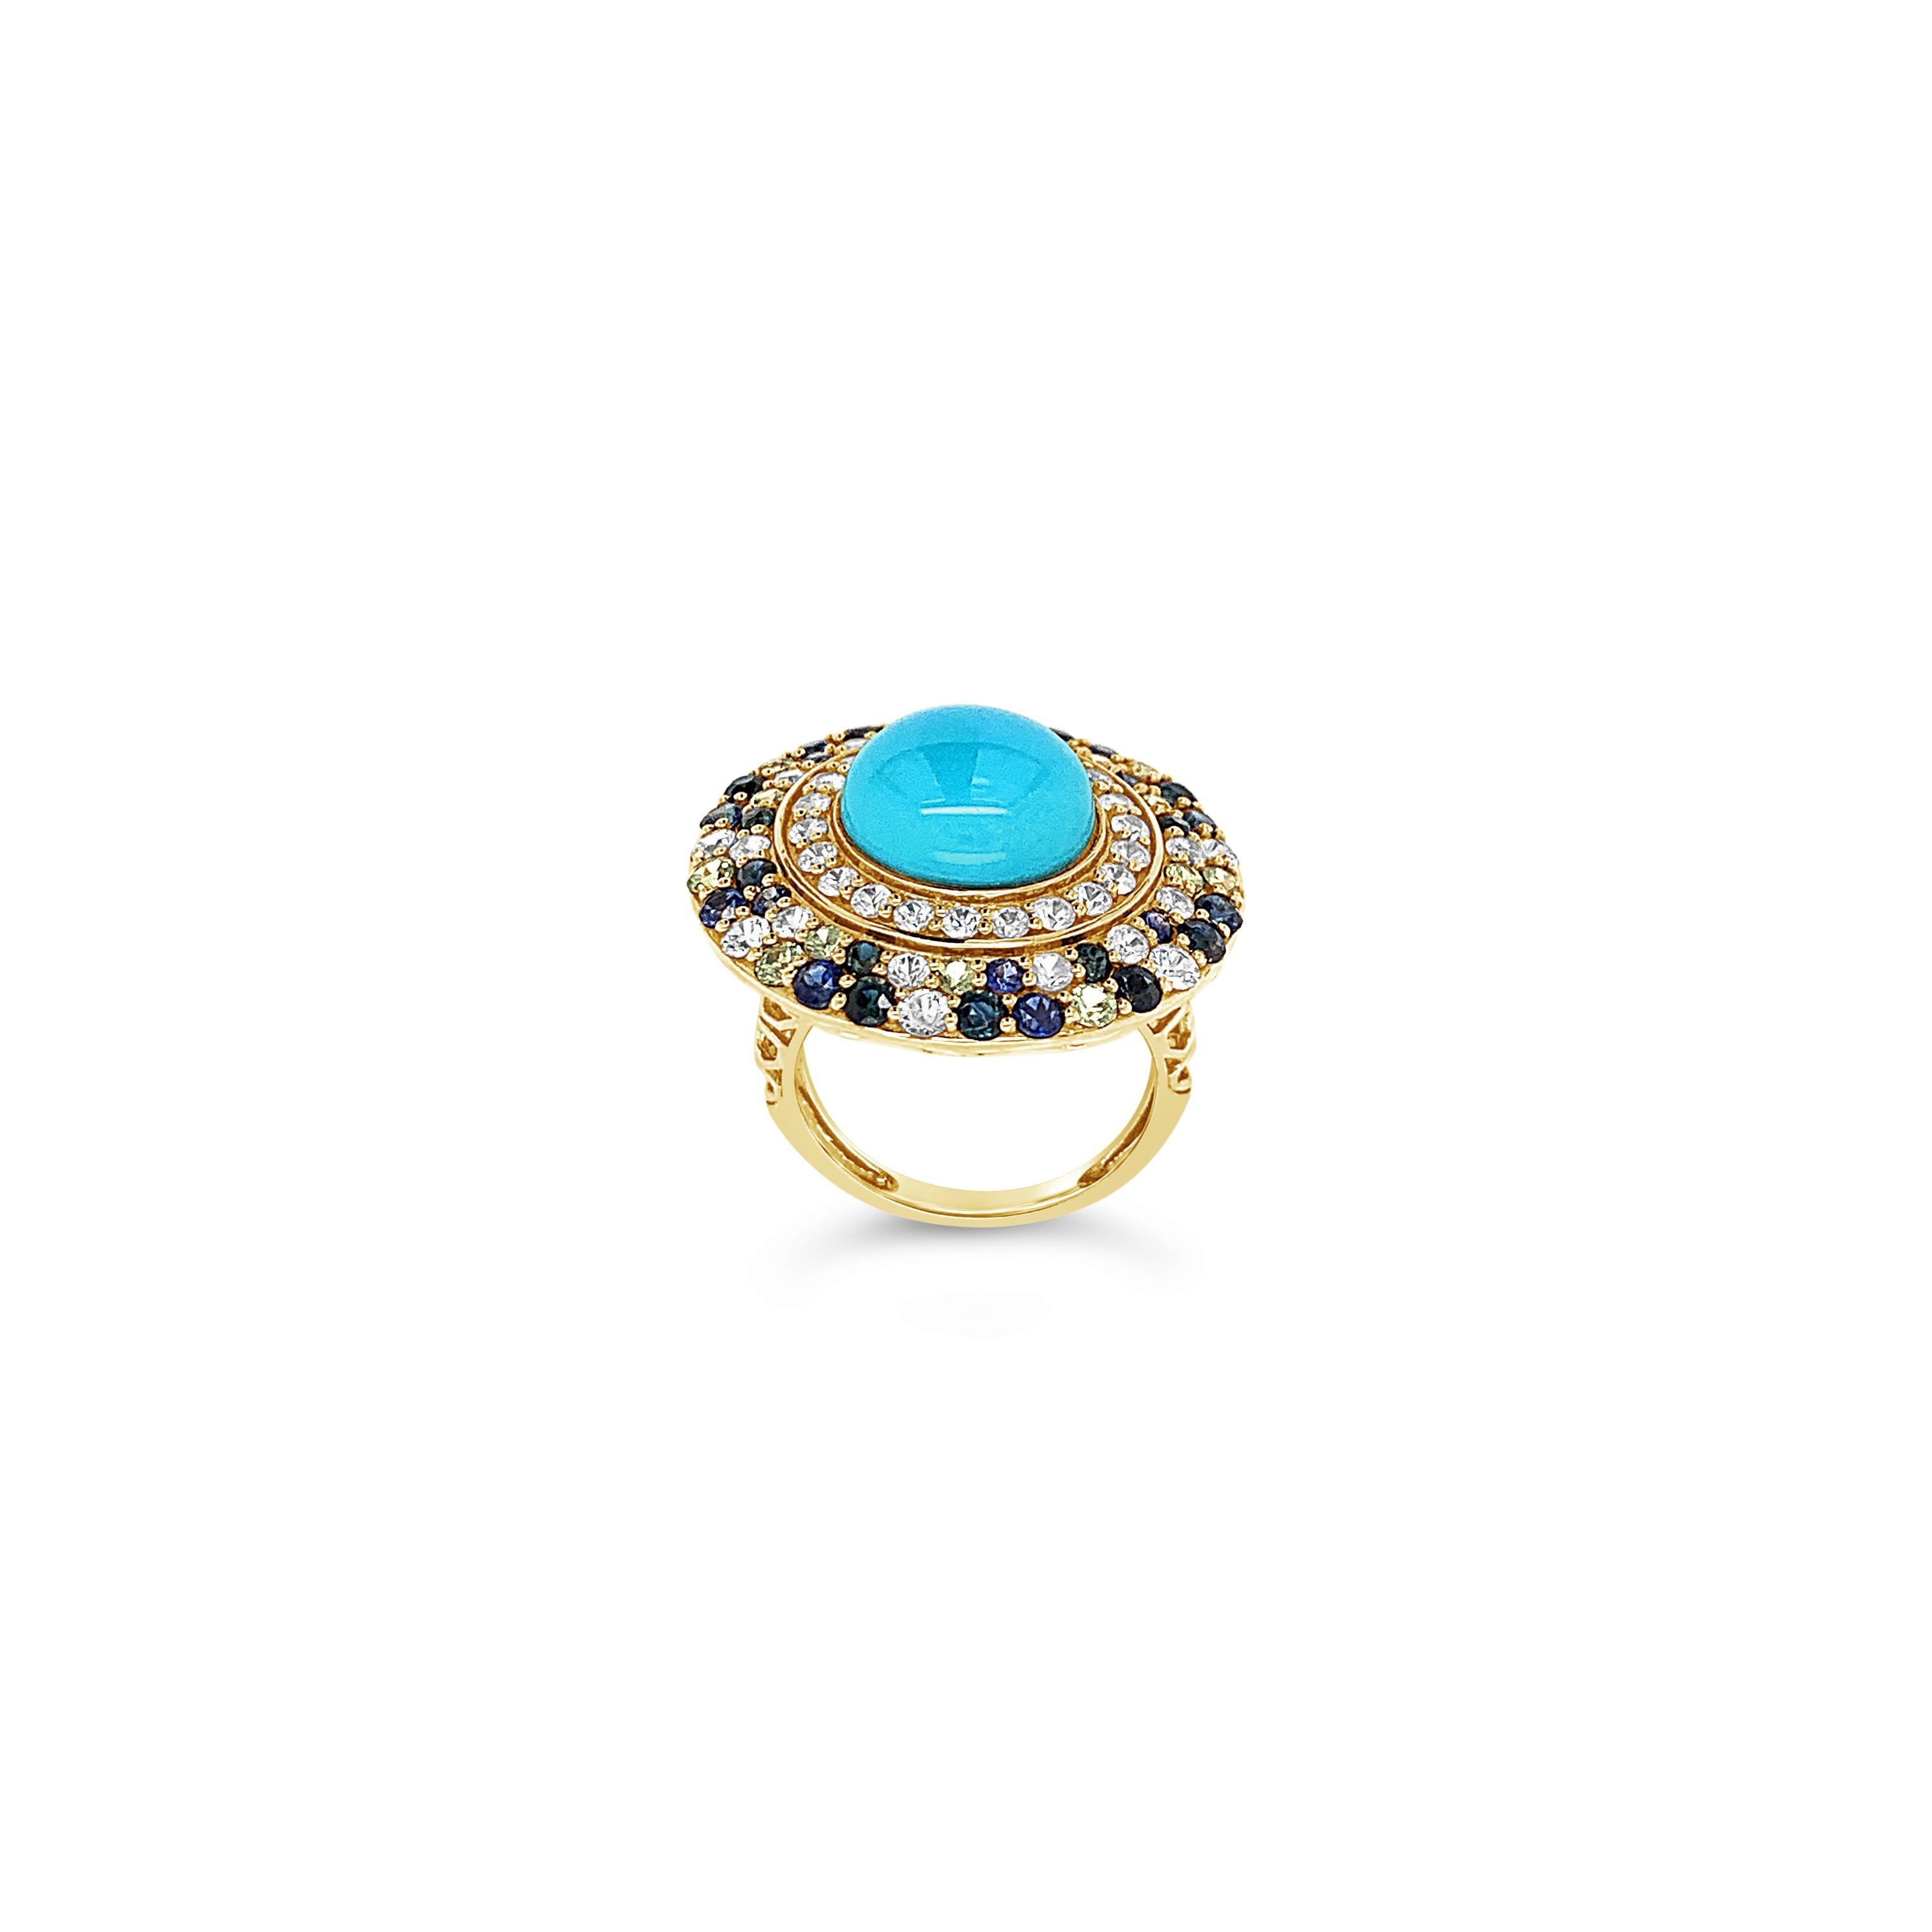 Carlo Viani® Ring featuring 3 5/8 cts. Multicolor Sapphire, Robins Egg Blue Turquoise™,  set in 14K Honey Gold™

Diamonds Breakdown:
None

Gems Breakdown:
12mm Turquoise
3 5/8 cts Multicolor Sapphire

Please feel free to reach out with any